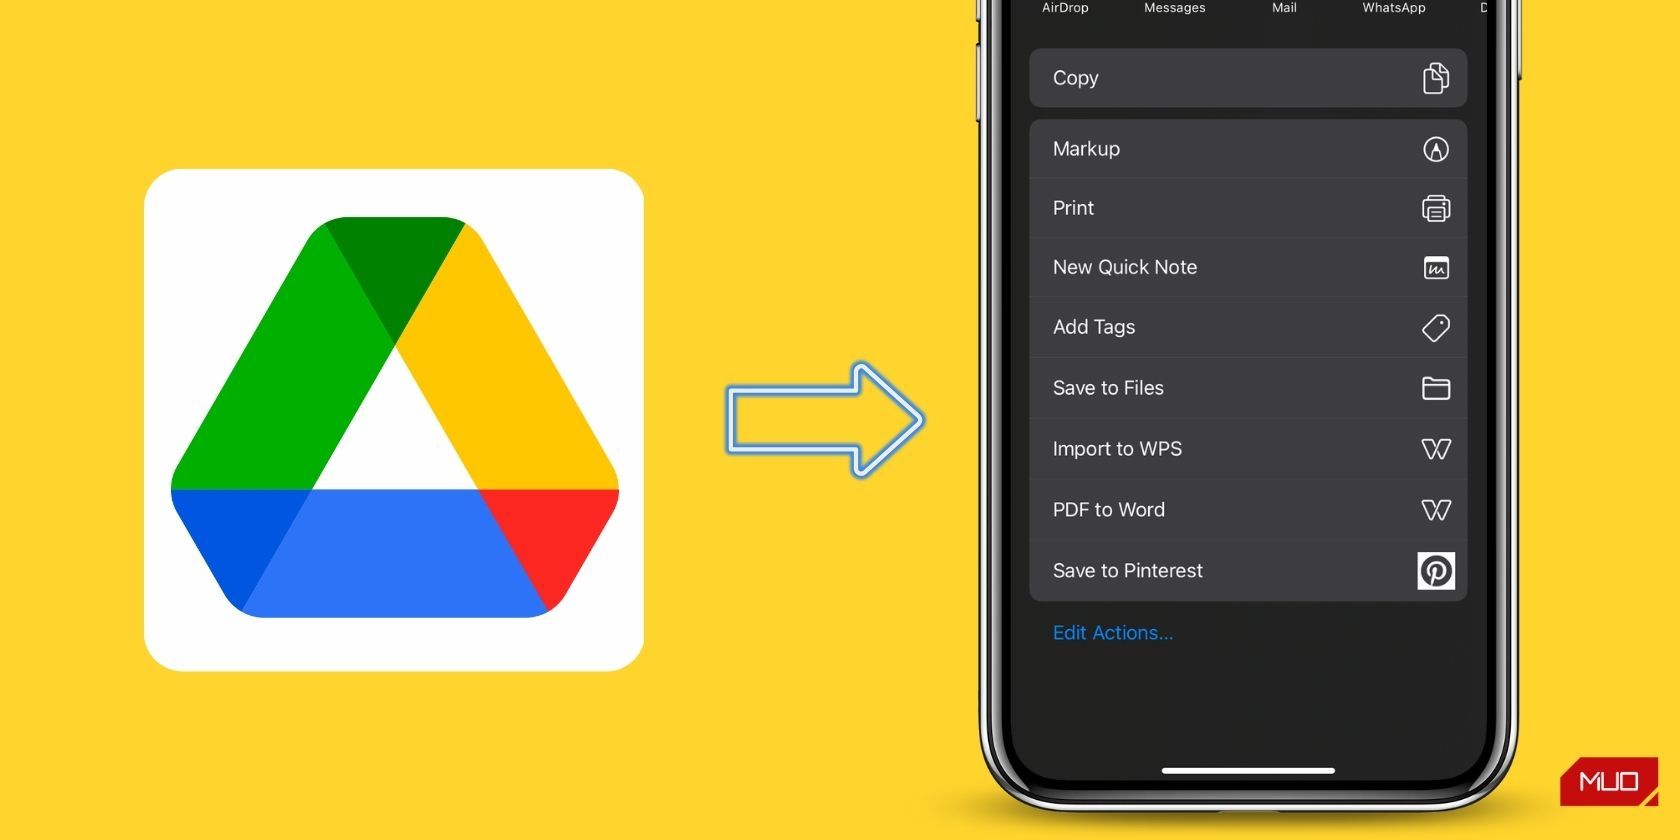 How to download photos from Google Drive to Android?